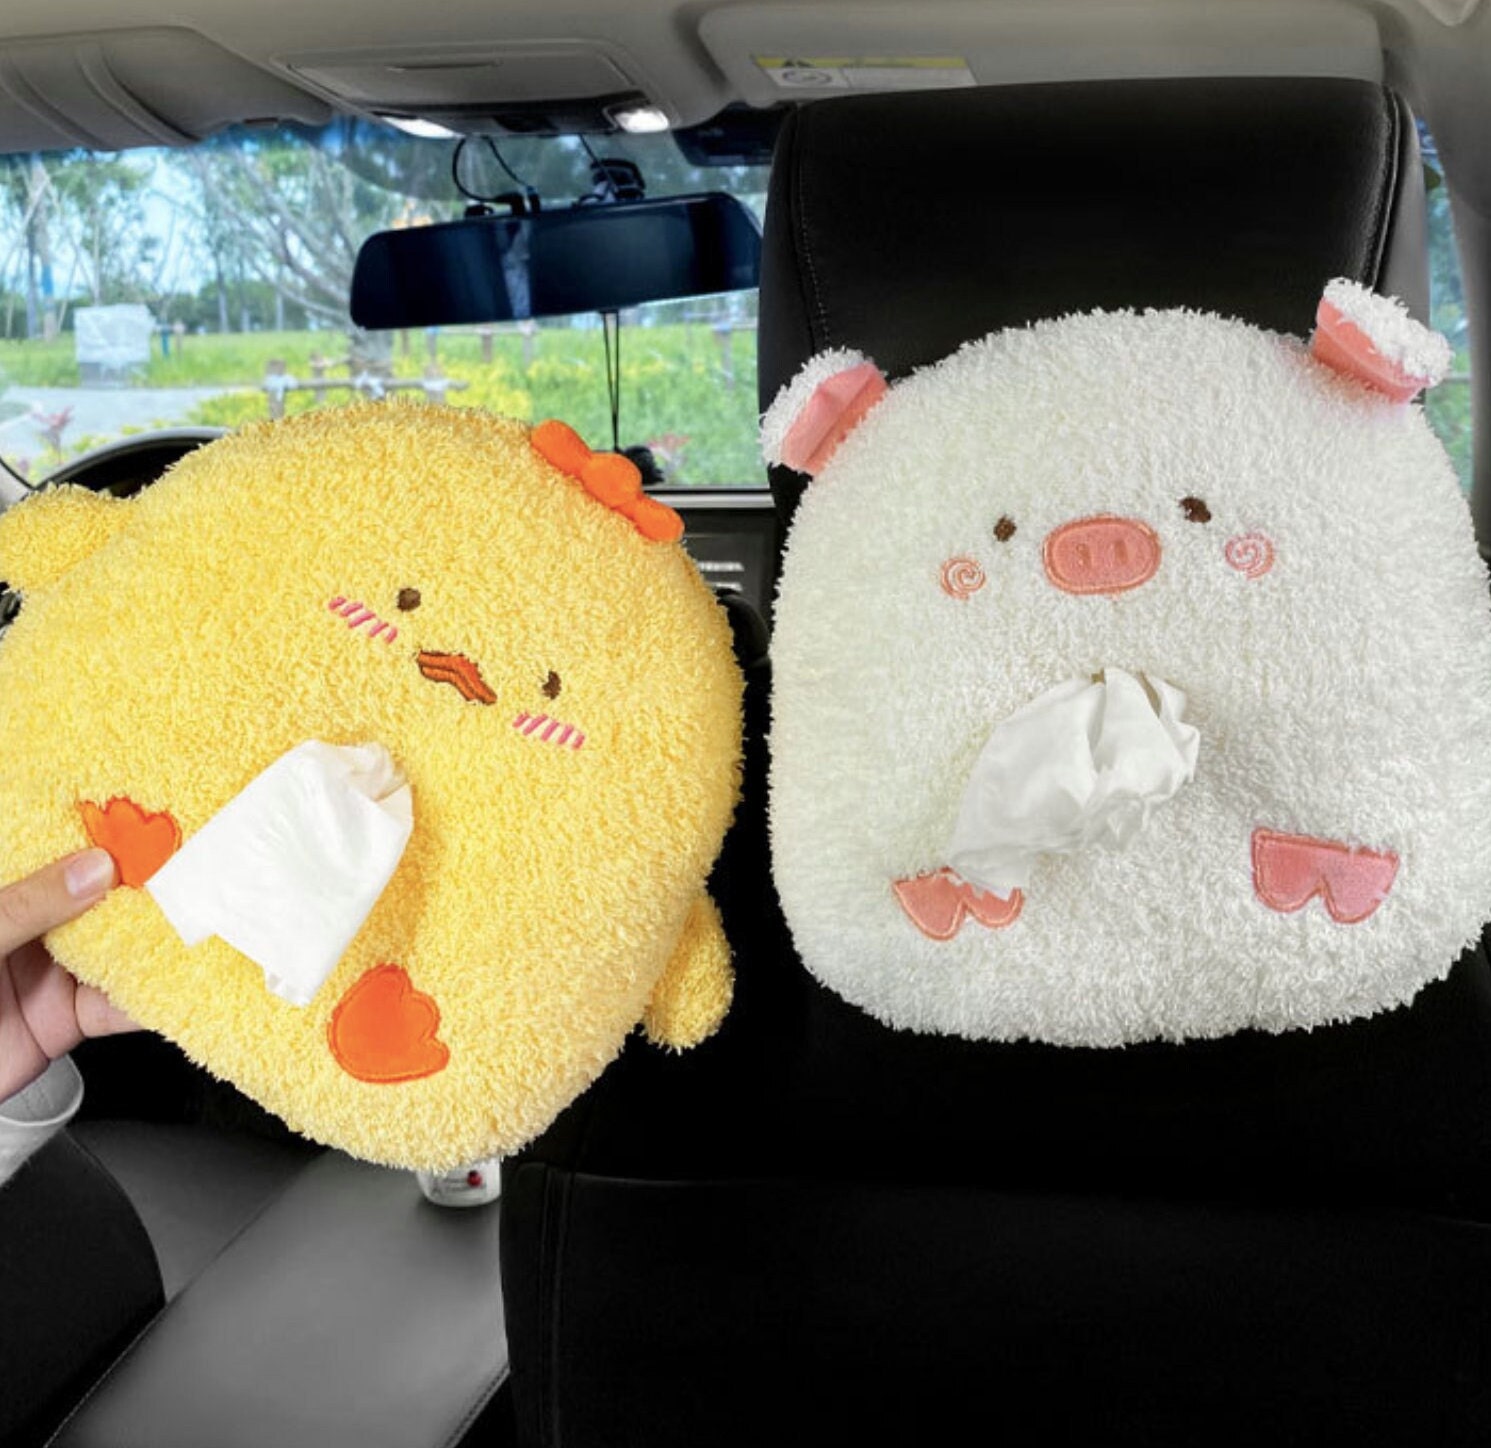 Buy Cute Tissue Holder Online In India -  India